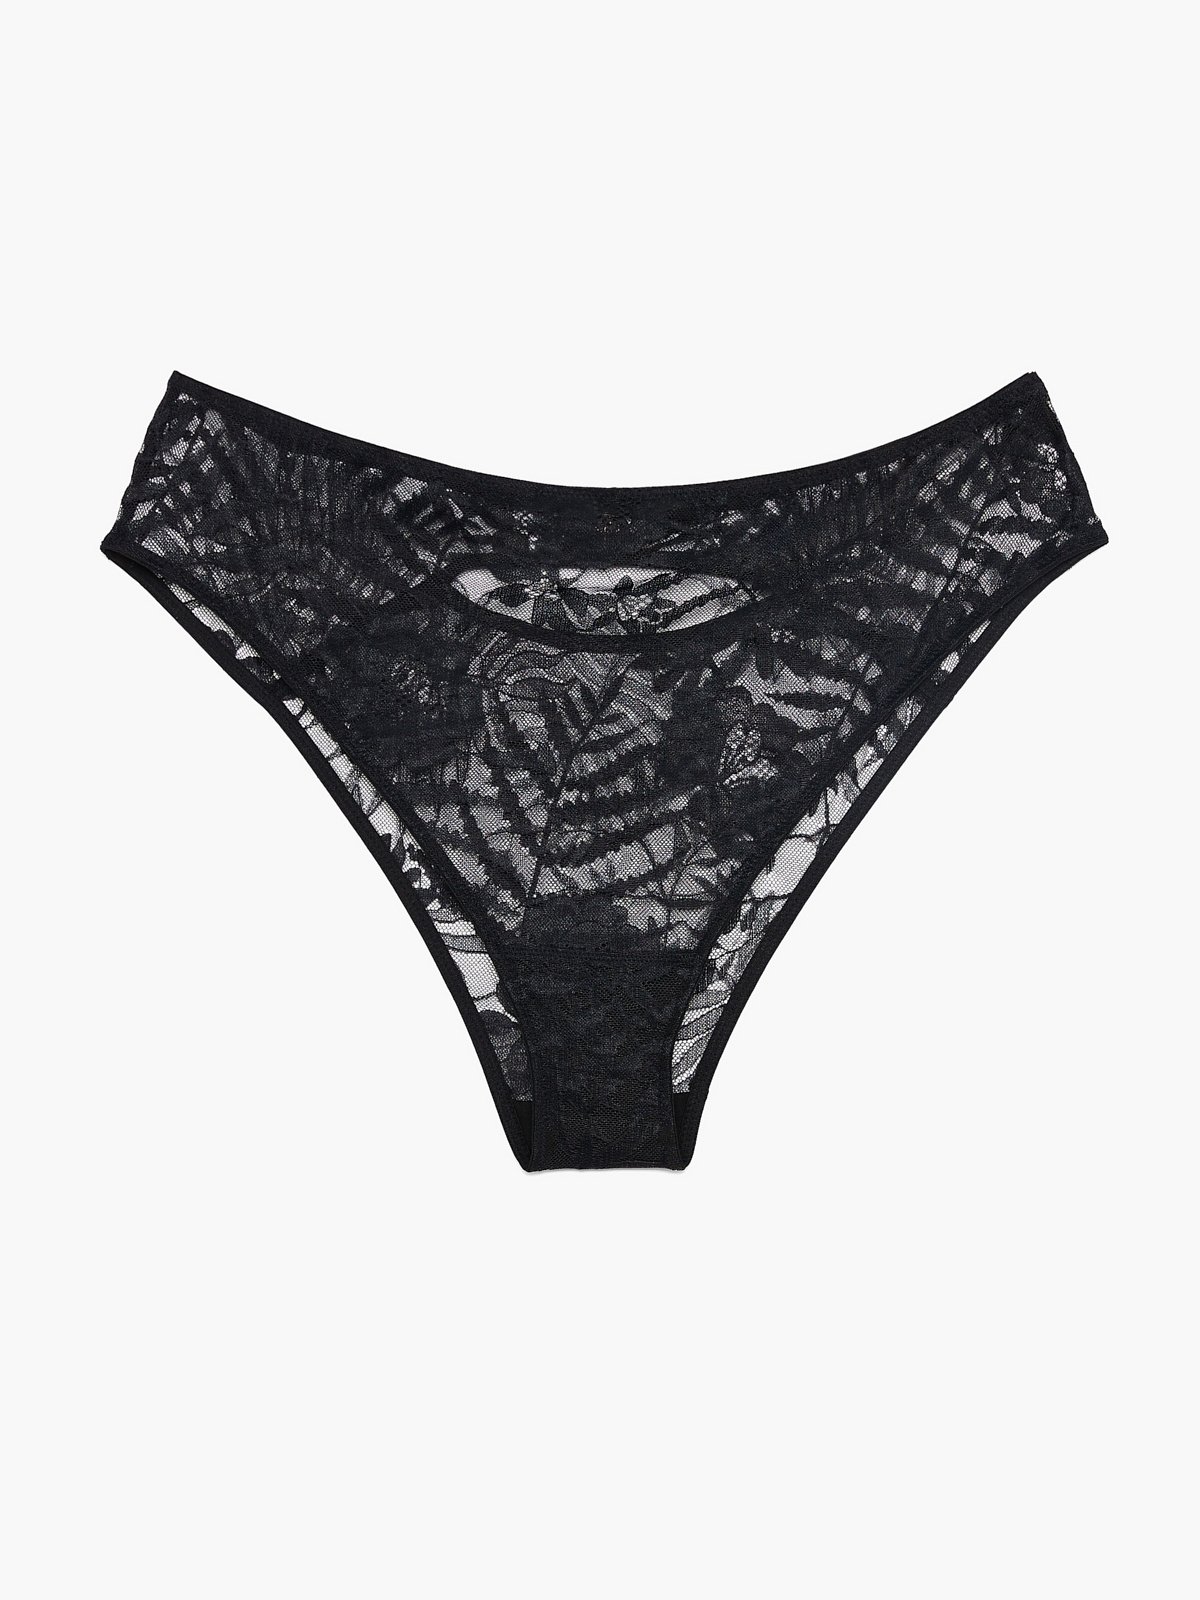 Shadowplay Lace Cheeky Panty in Black